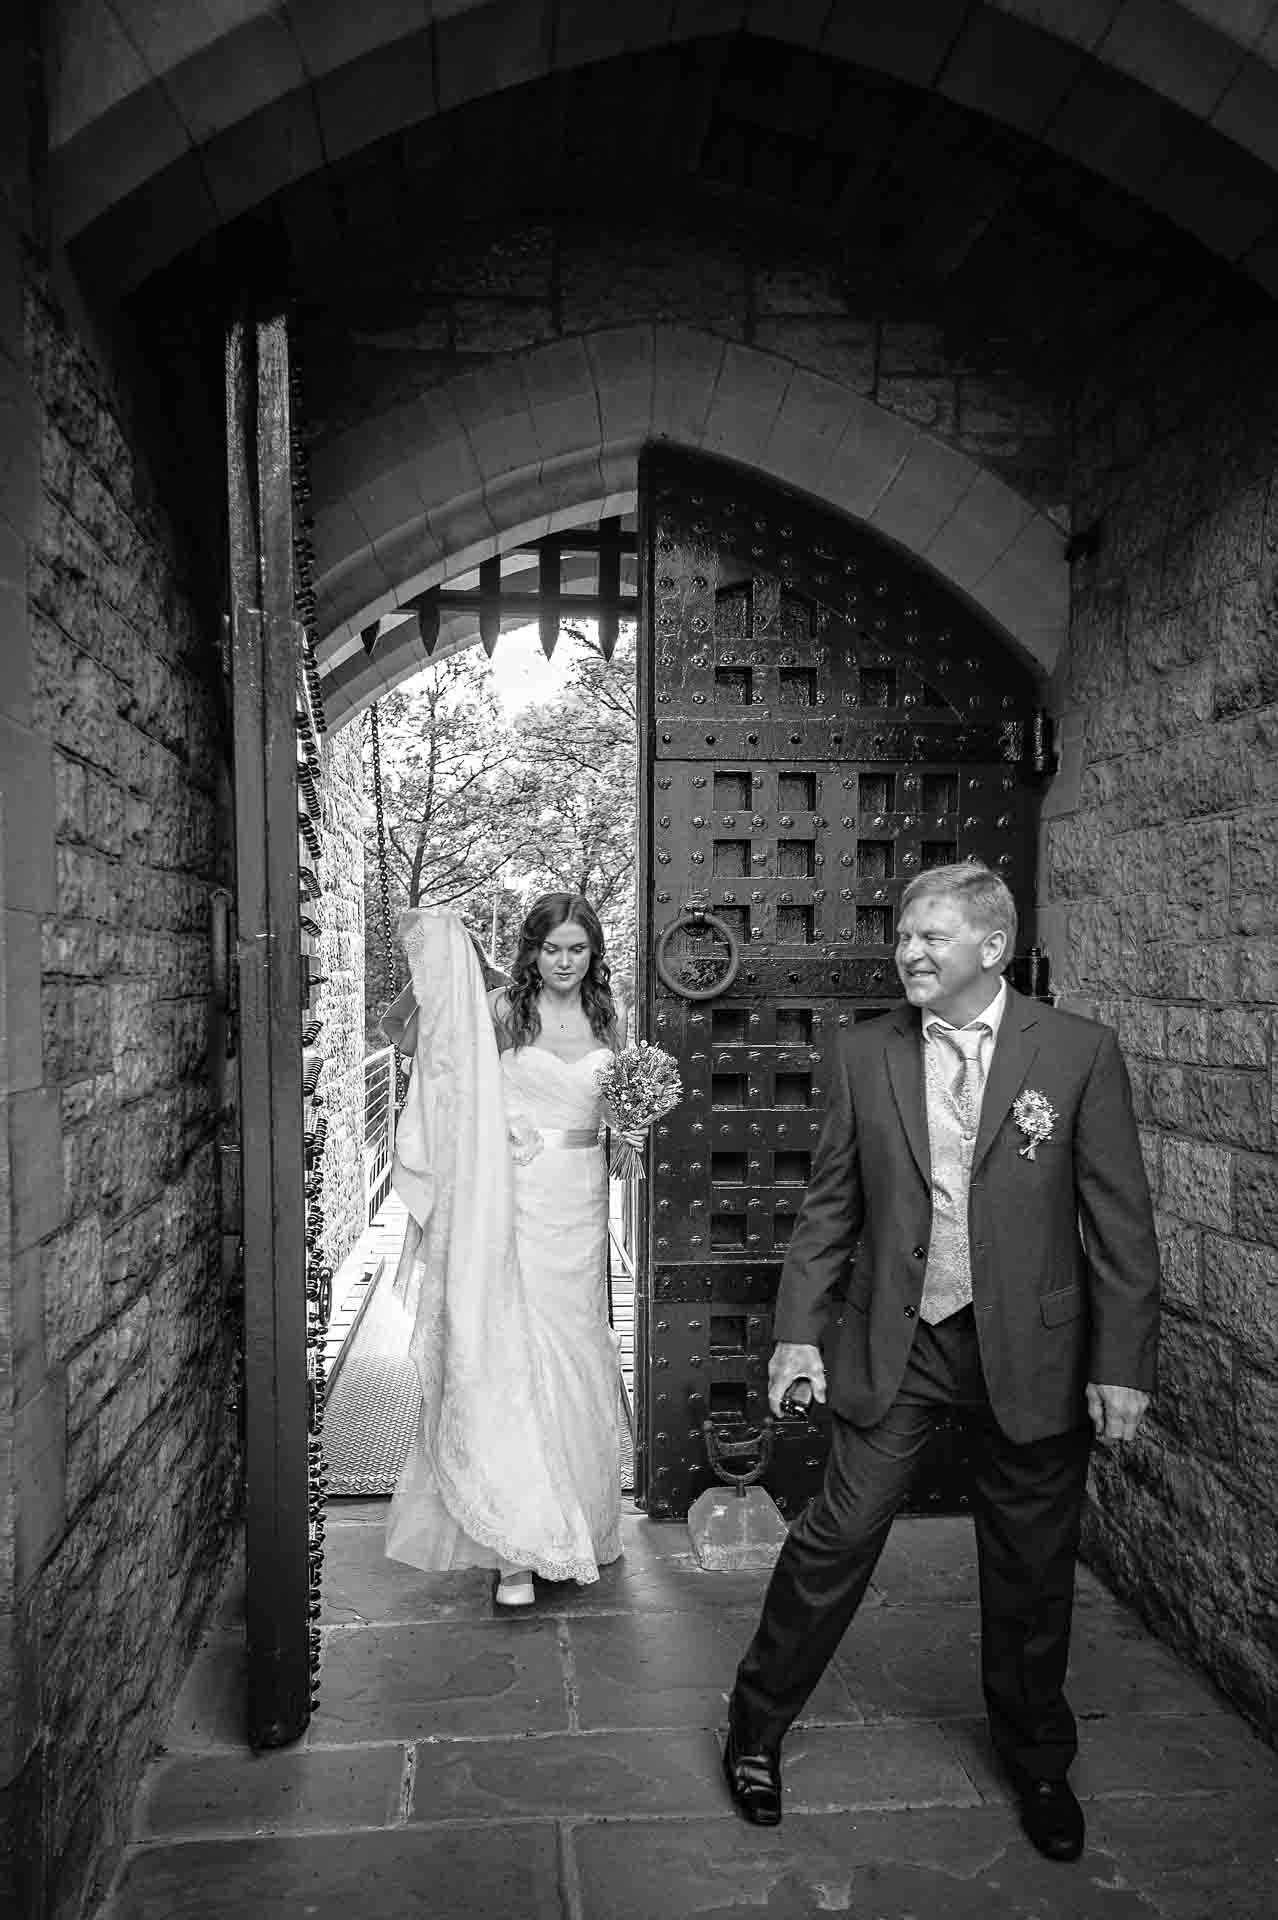 Castell Coch Wedding - Bride arrives through portcullis gate with step-father